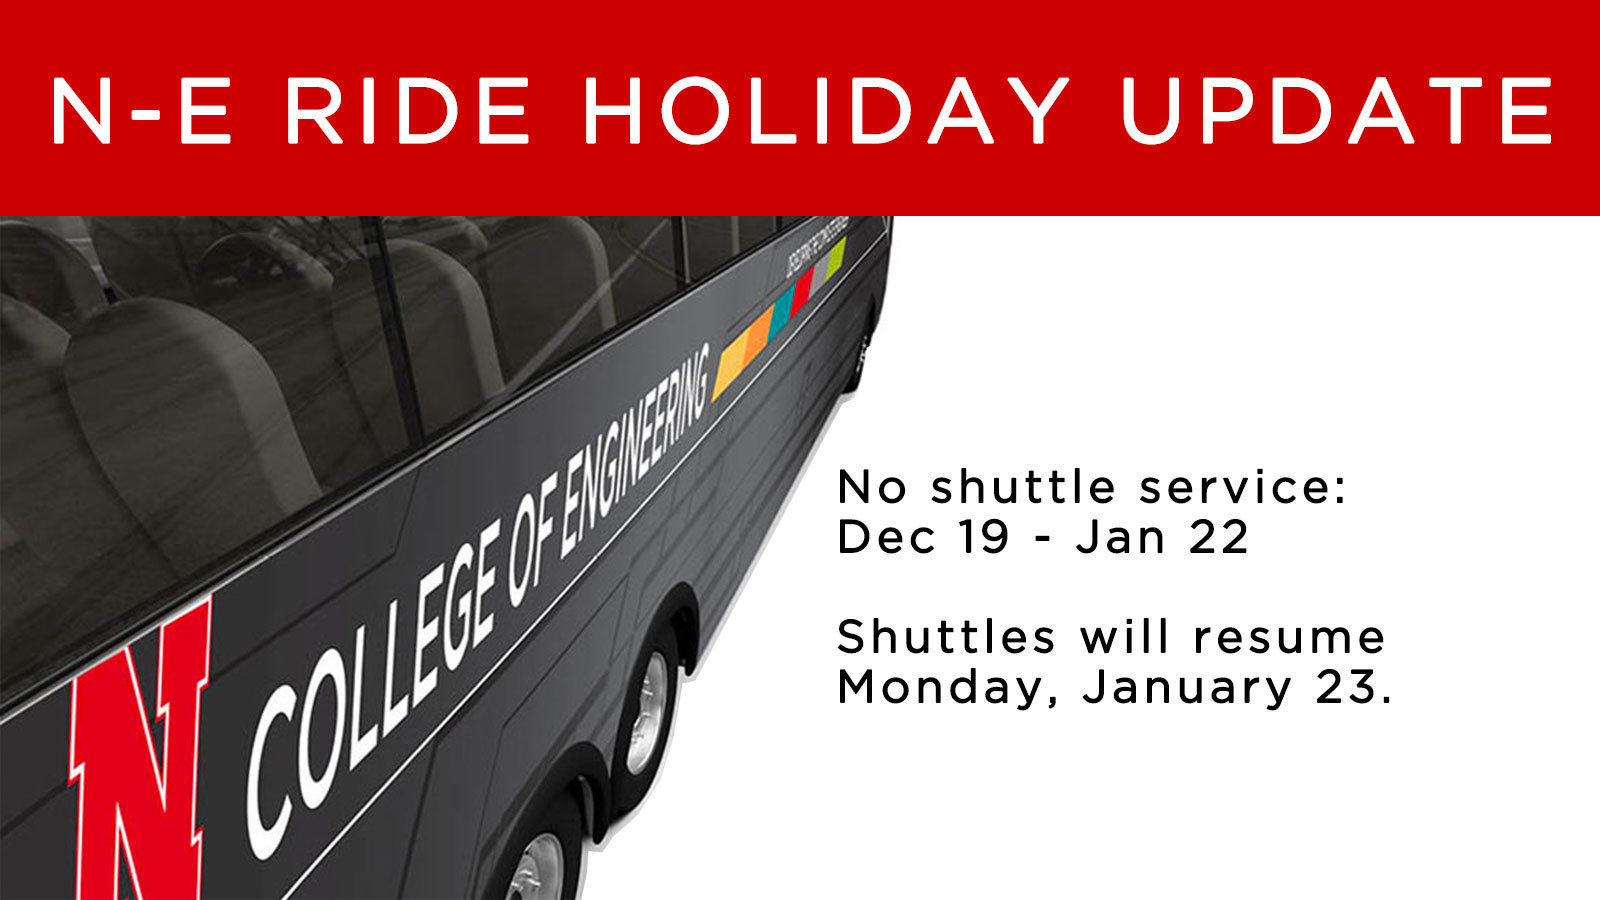 N-E Ride shuttles will resume their usual schedule on Monday, Jan. 23.